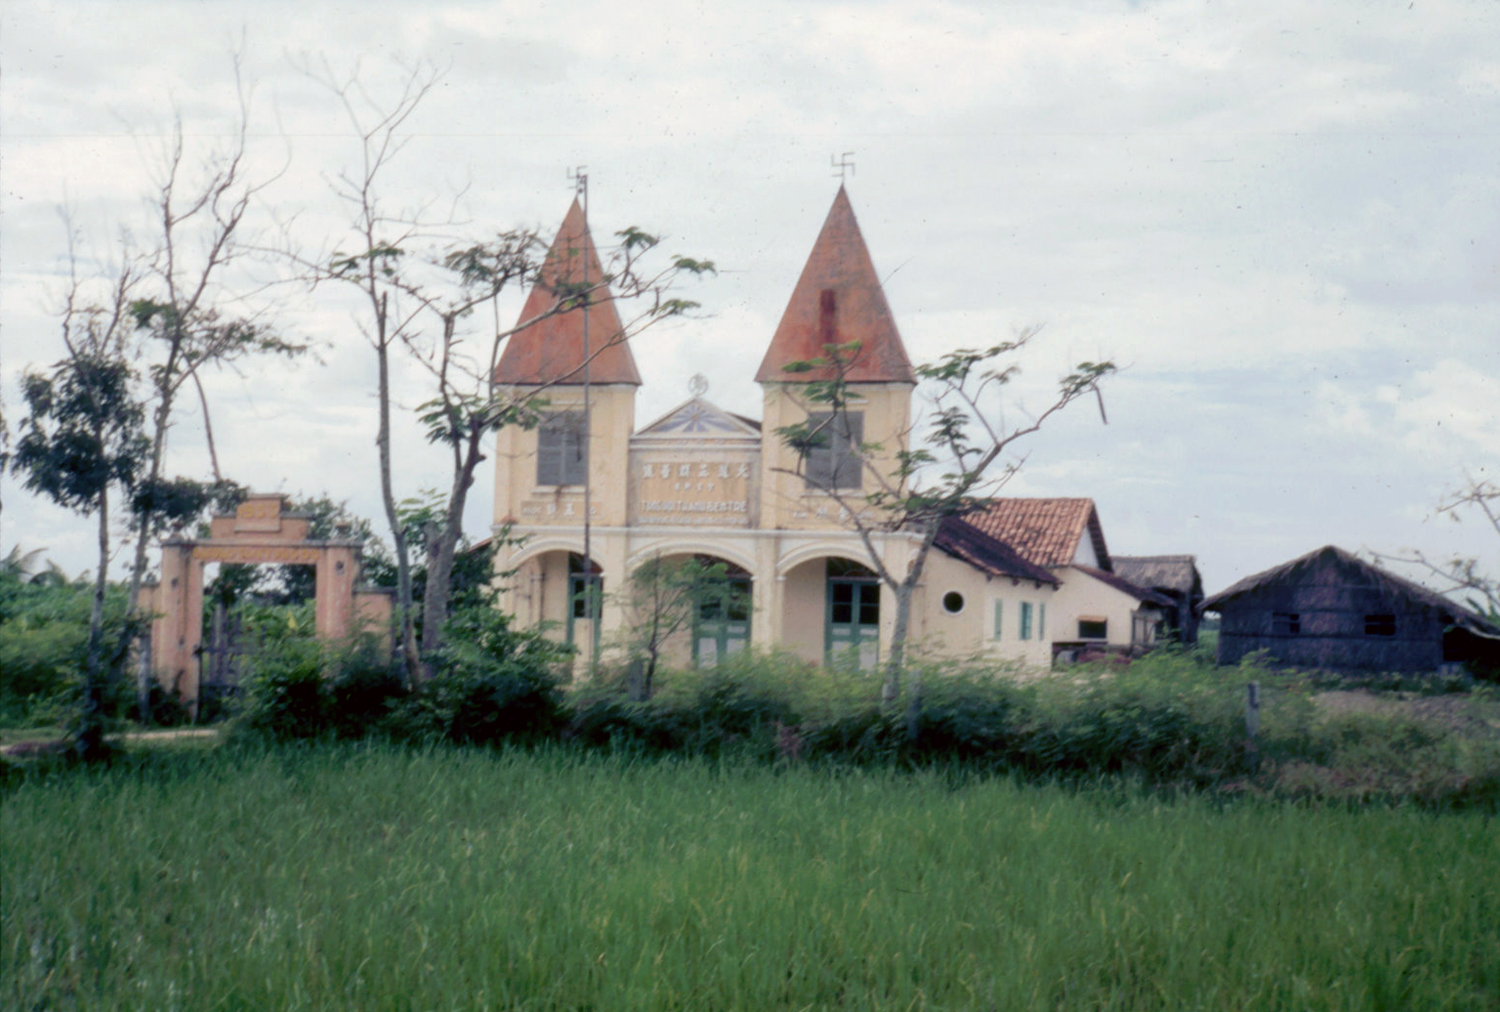 a tall church stands among the green foliage